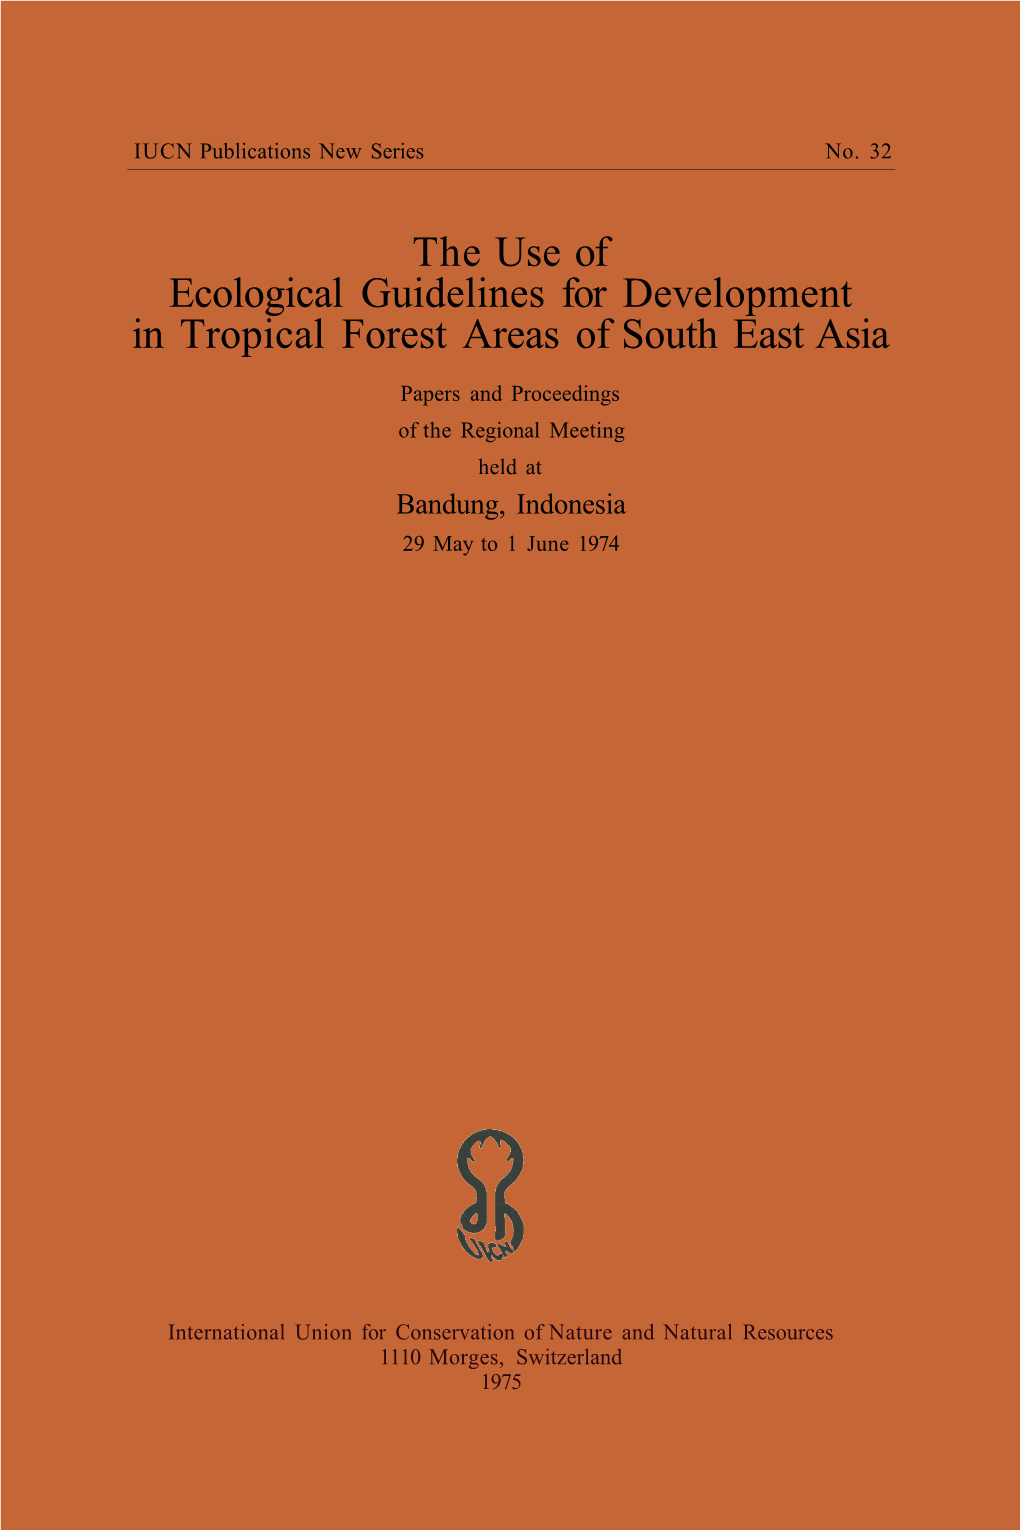 The Use of Ecological Guidelines for Development in Tropical Forest Areas of South East Asia